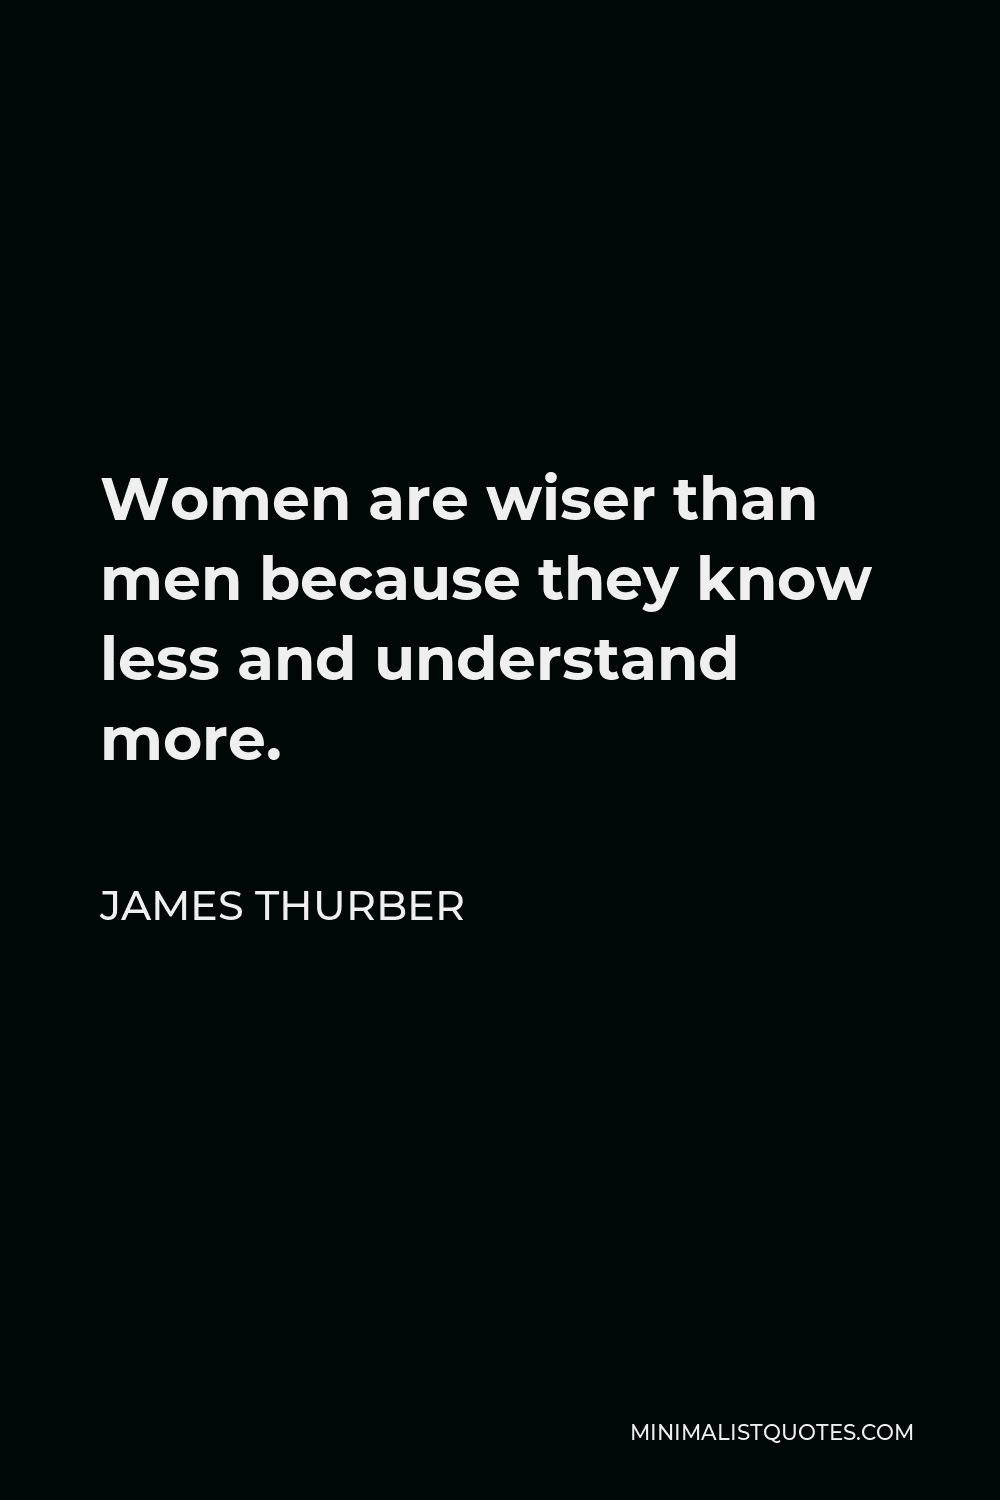 James Thurber Quote - Women are wiser than men because they know less and understand more.